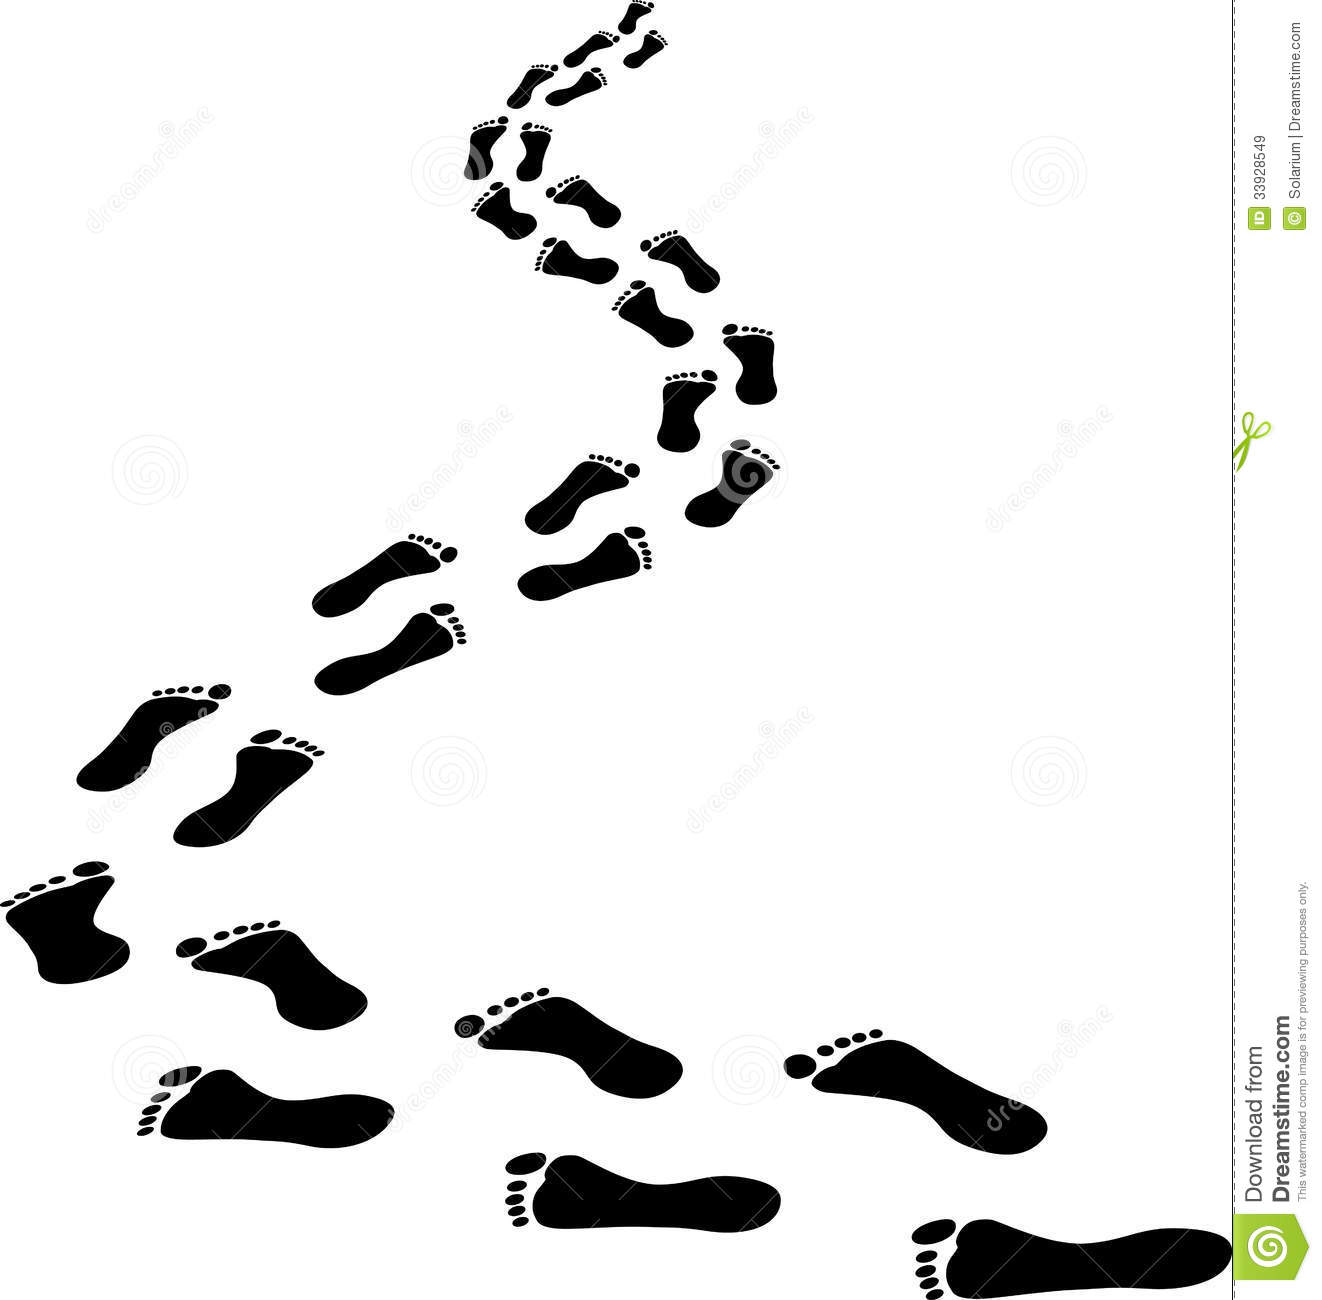 Footsteps clipart footprints in sand. The drawing free download